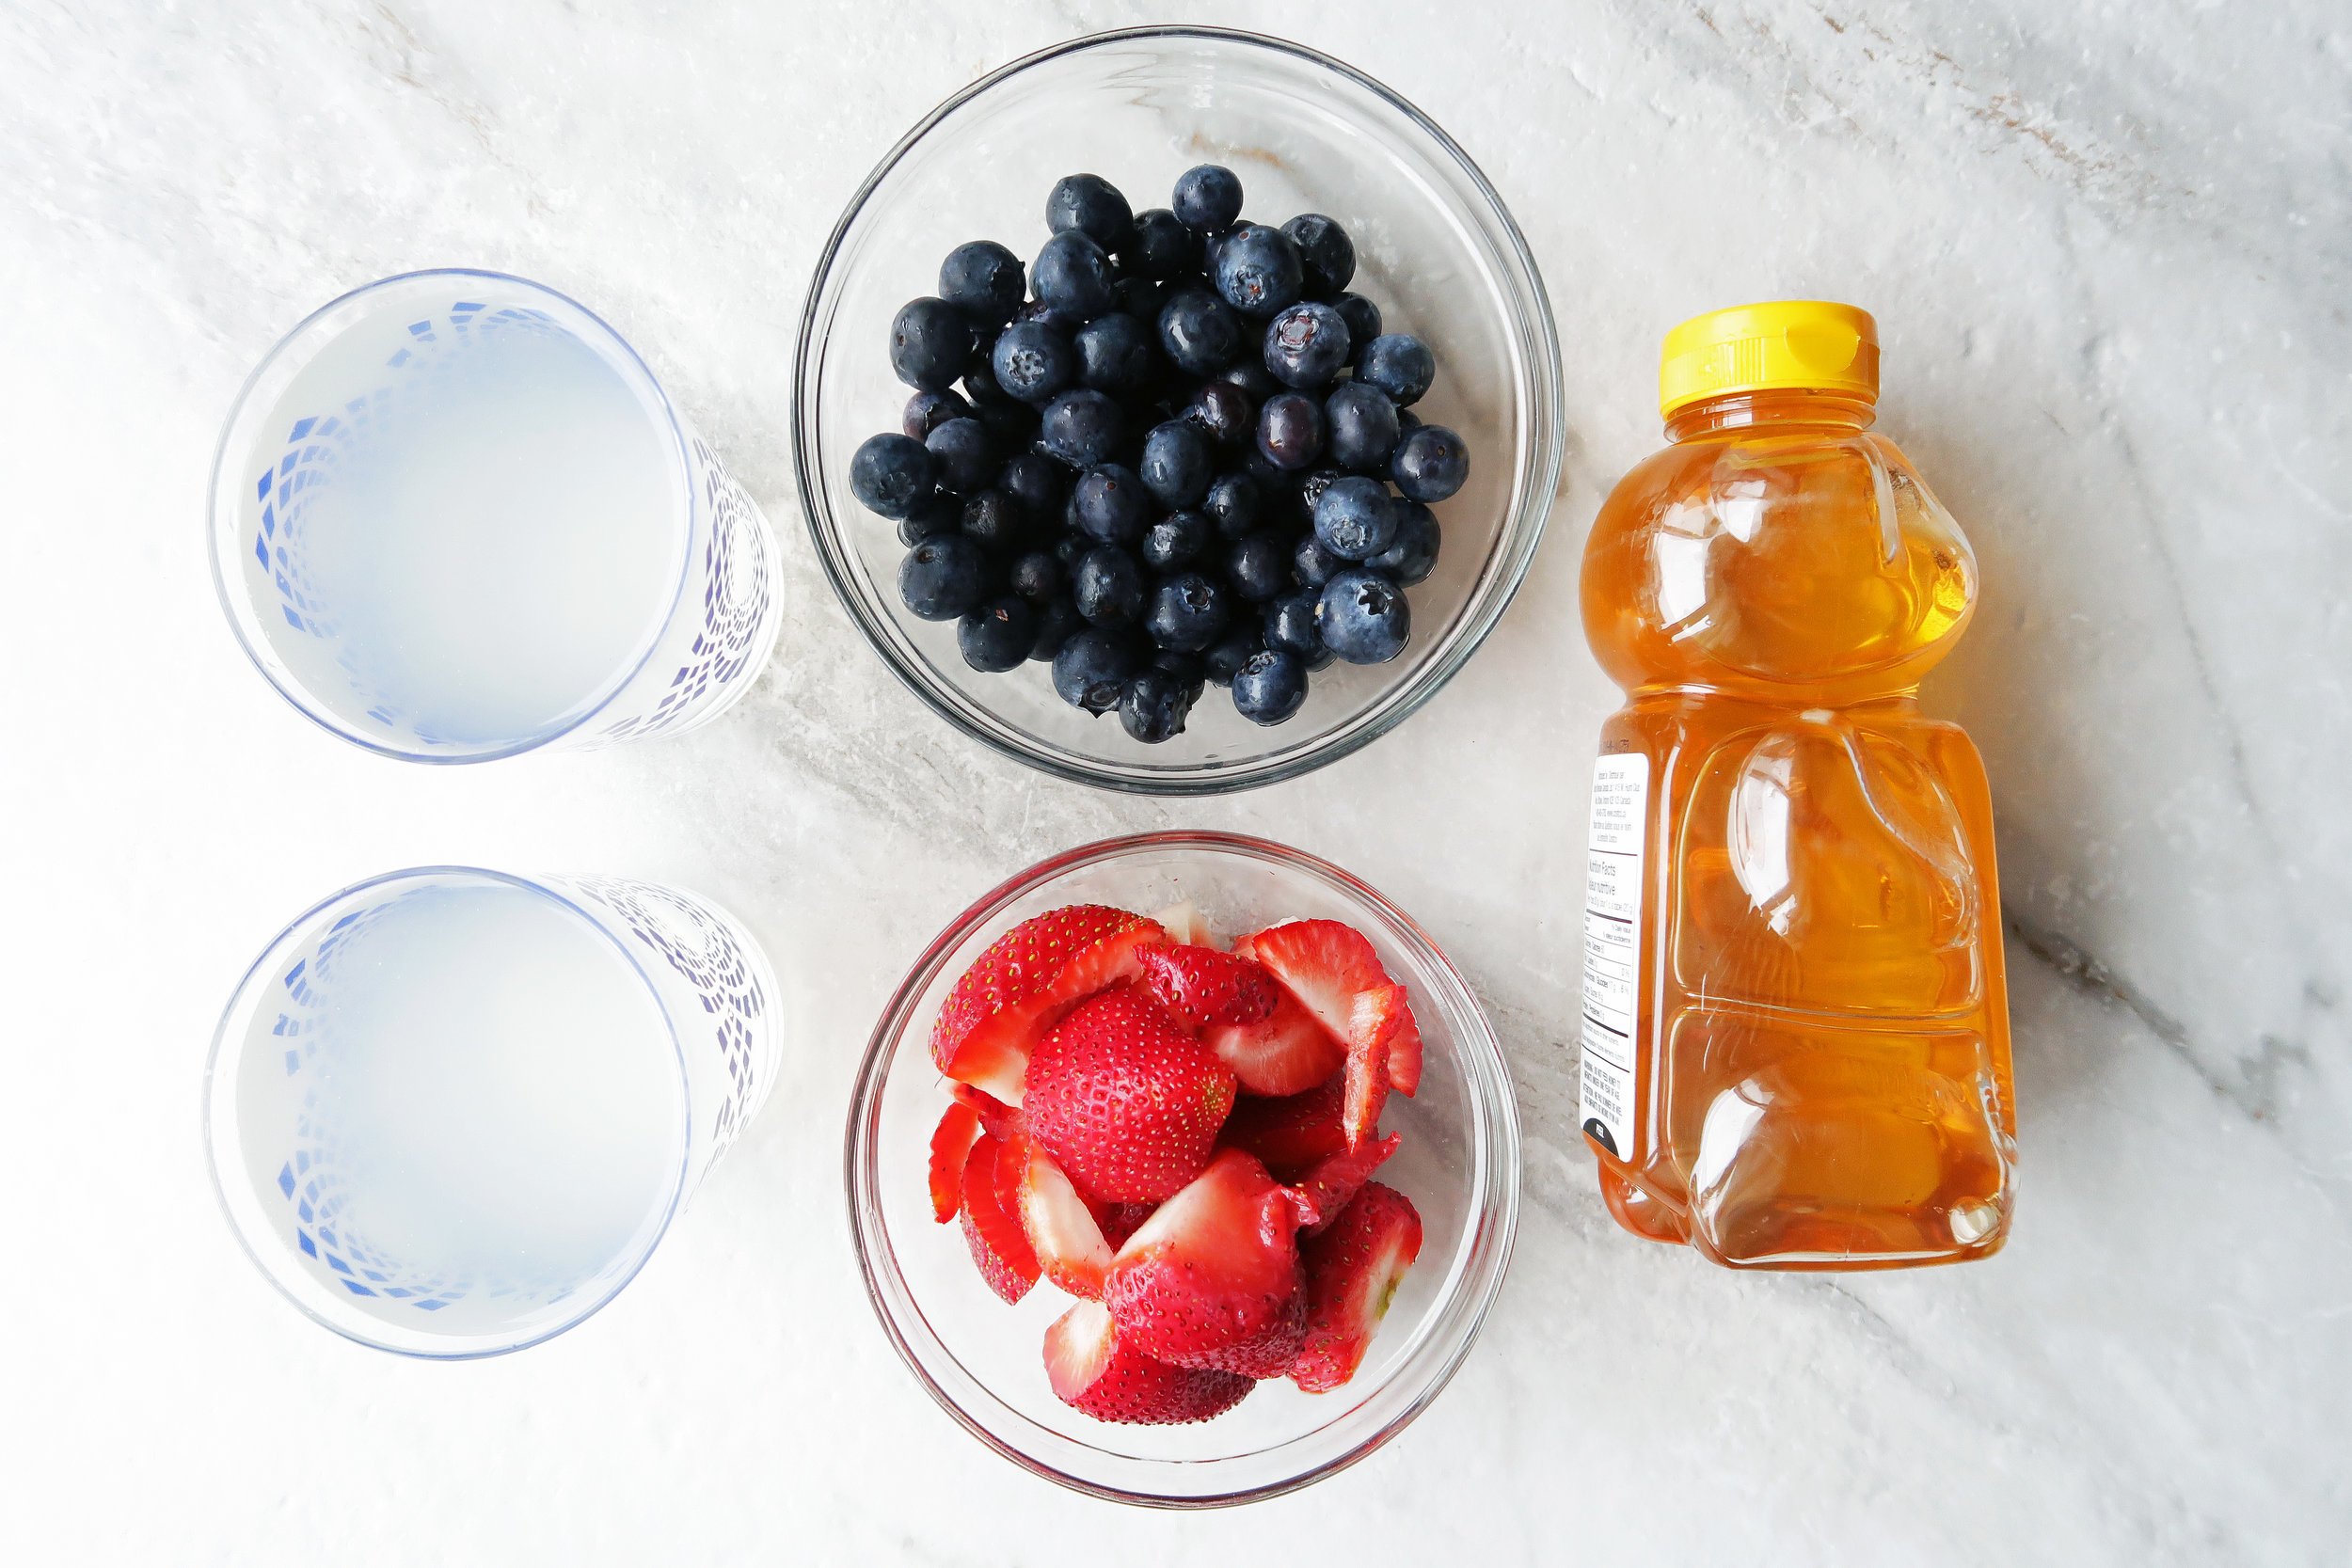 Bowls of strawberries, blueberries, and coconut water next to a bottle of honey.